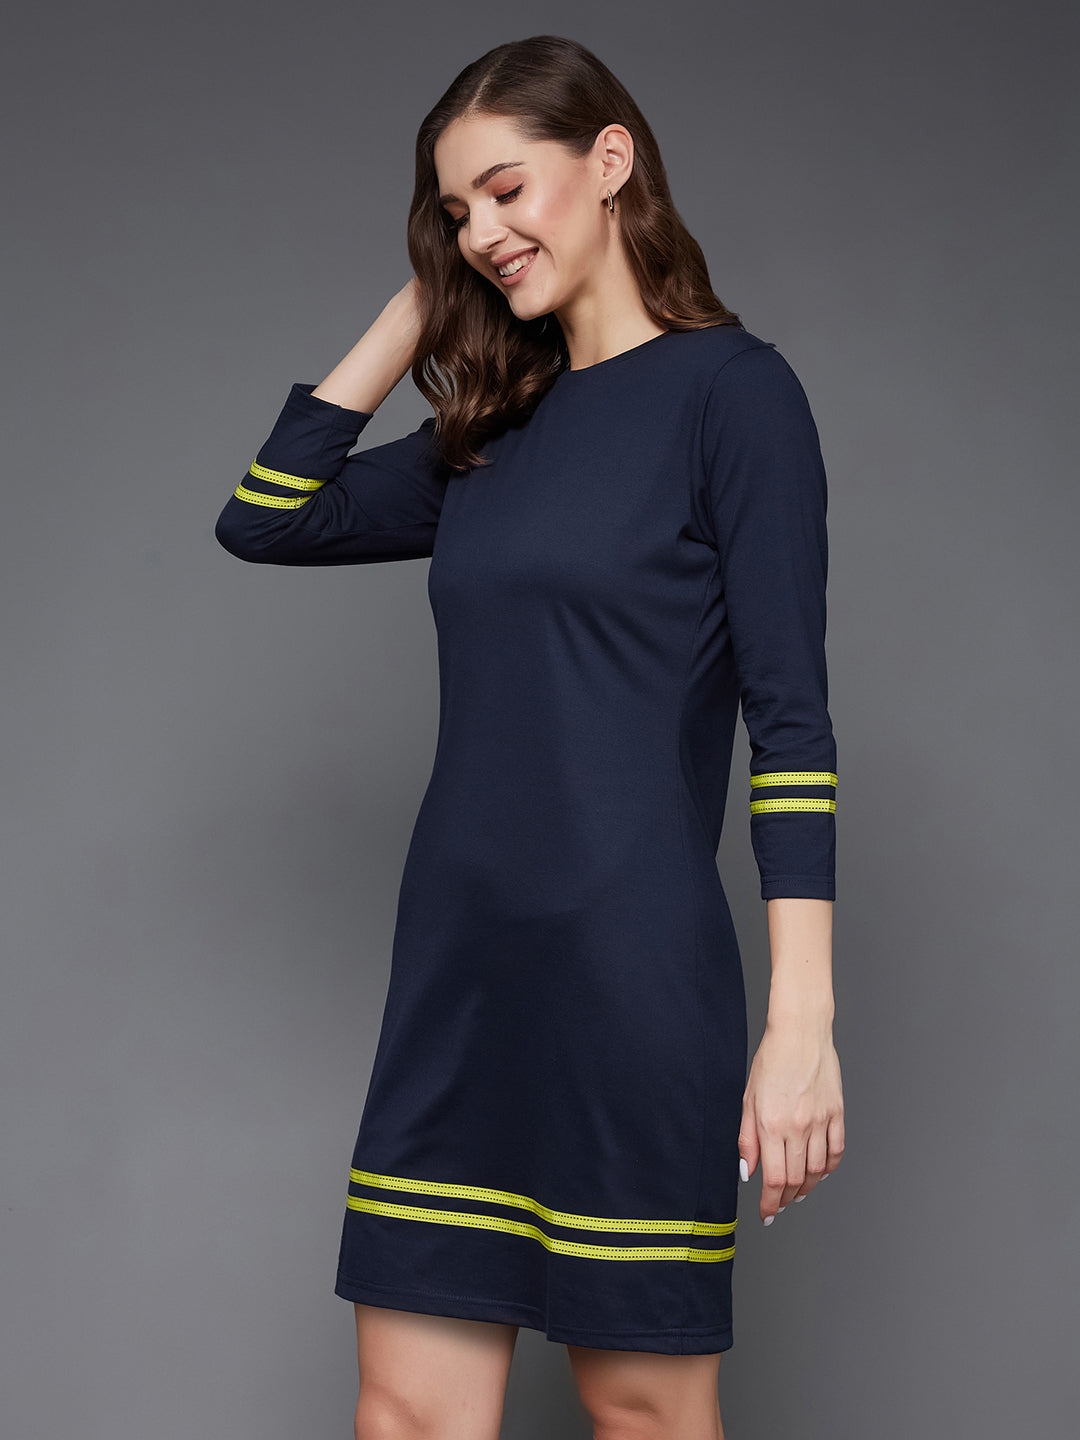 Navy Blue Round Neck 3/4 Sleeves Solid Shift Dress